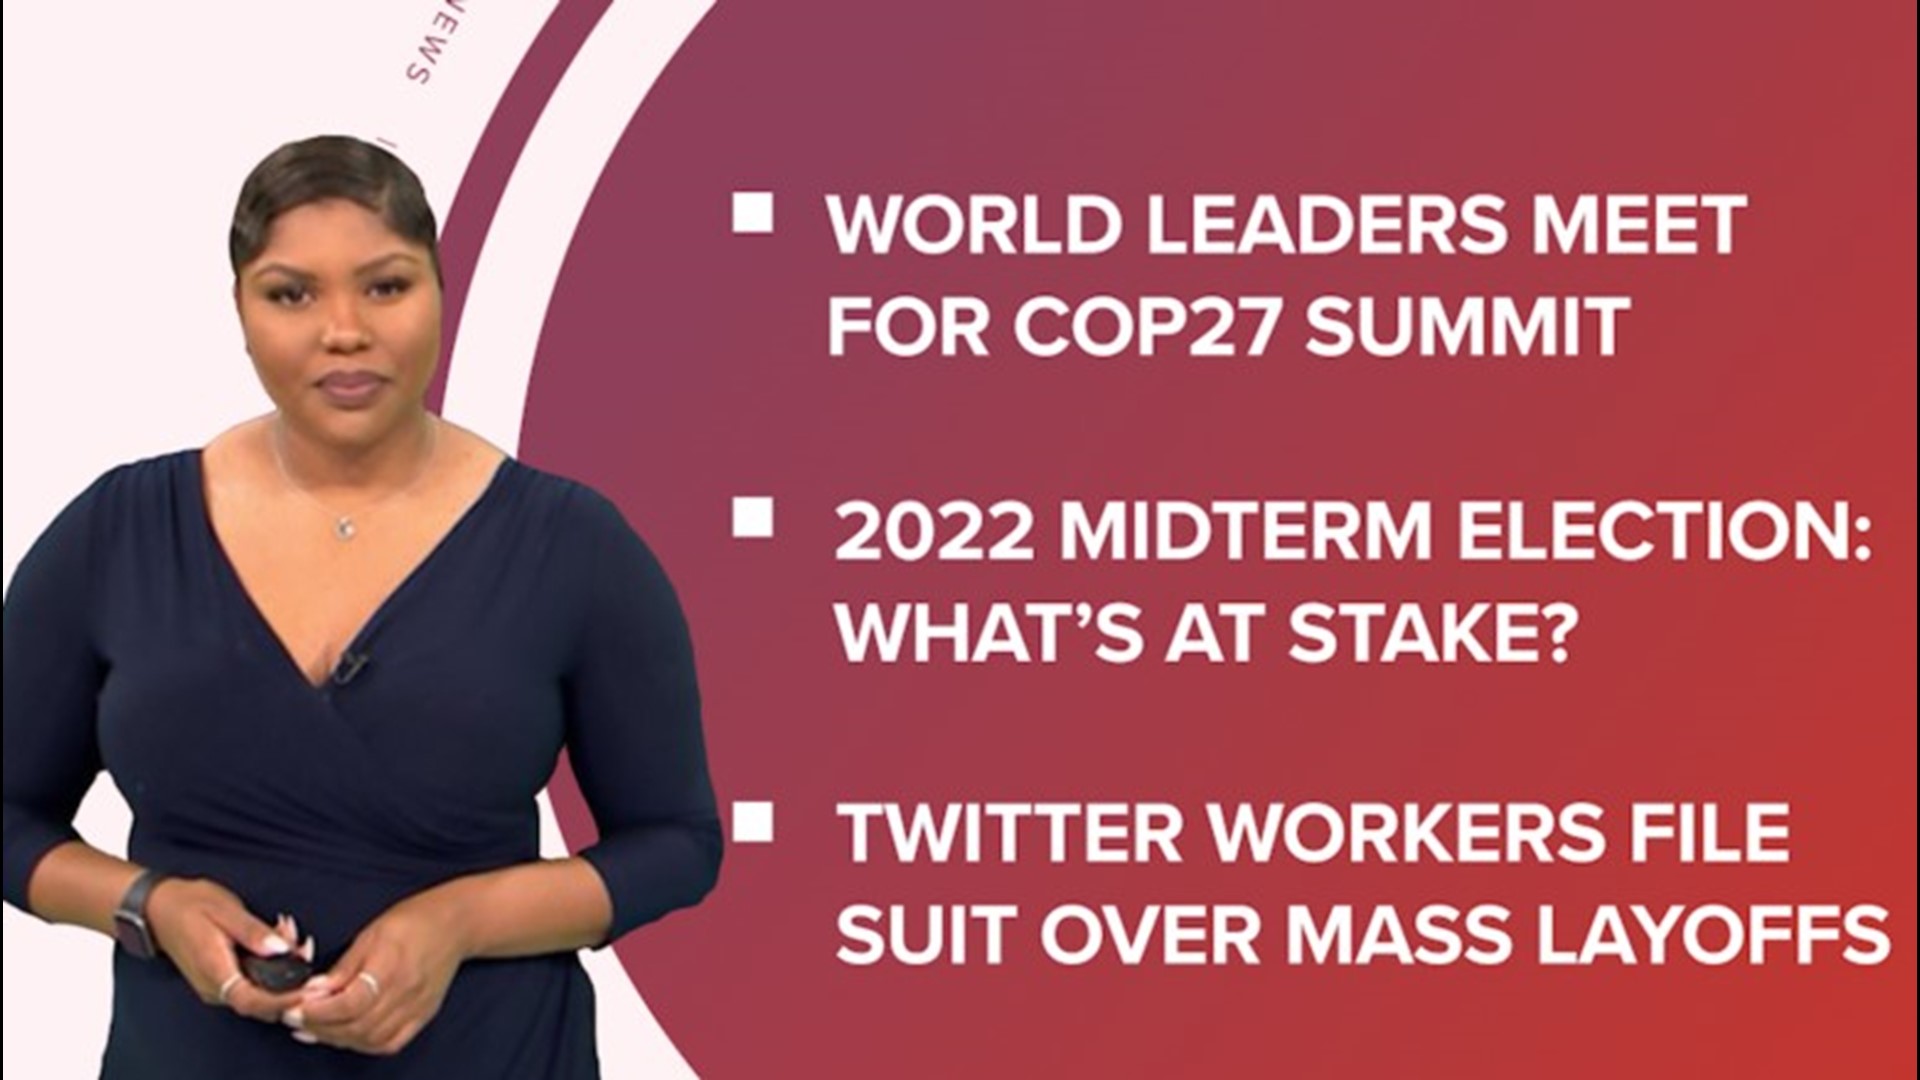 A look at what is happening in the news from the start of the COP27 summit focusing on climate change to a record Powerball jackpot and Facebook layoffs possible.